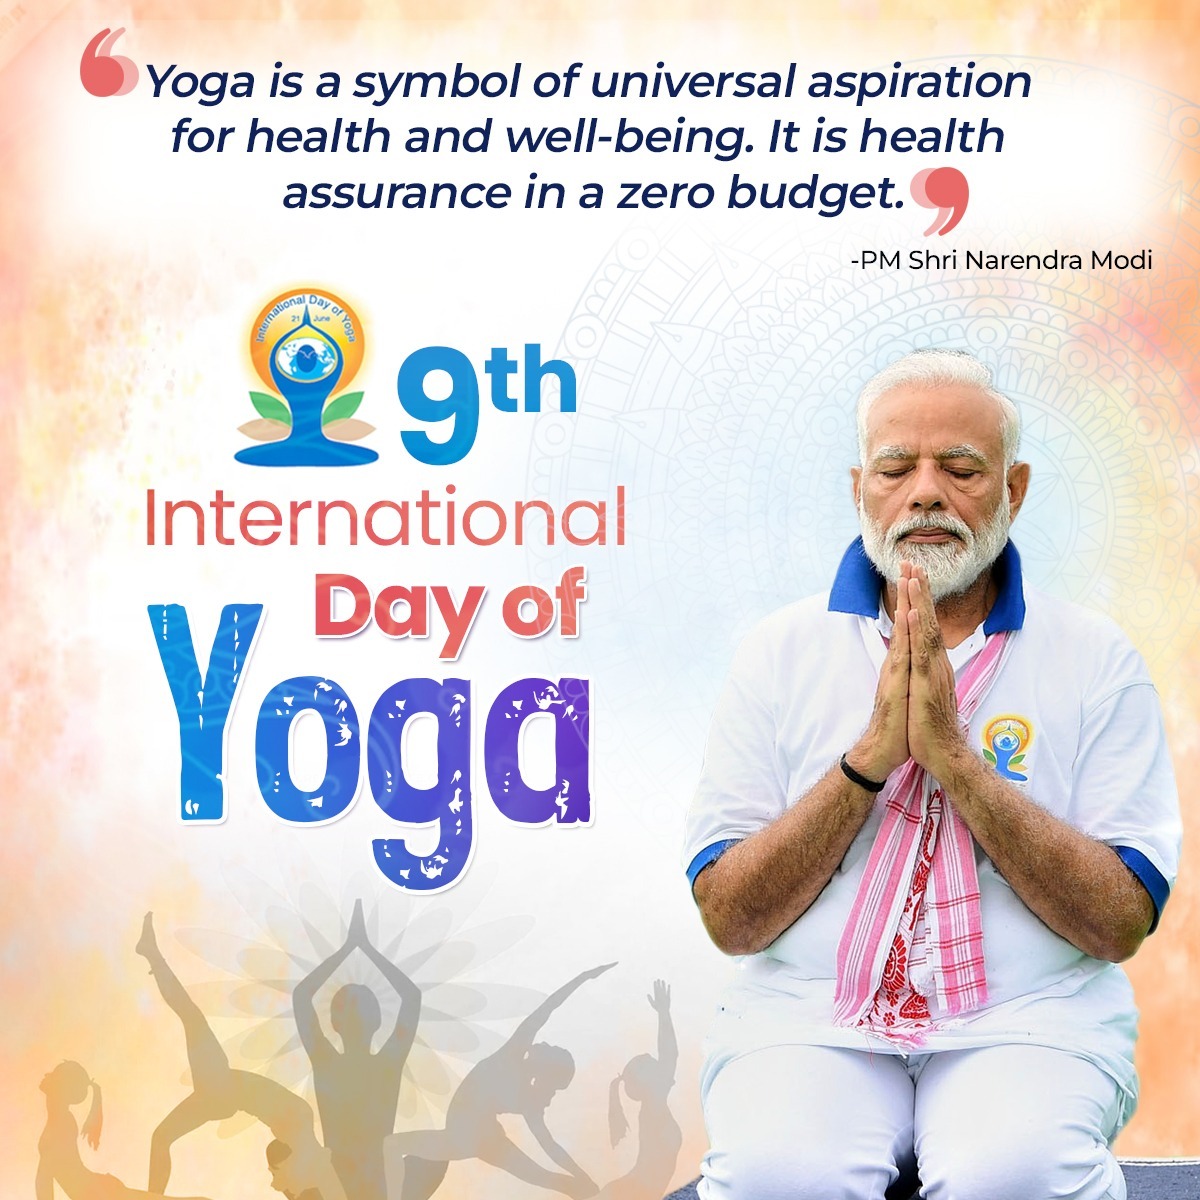 BJP on X: Let's celebrate the 9th International Yoga Day and